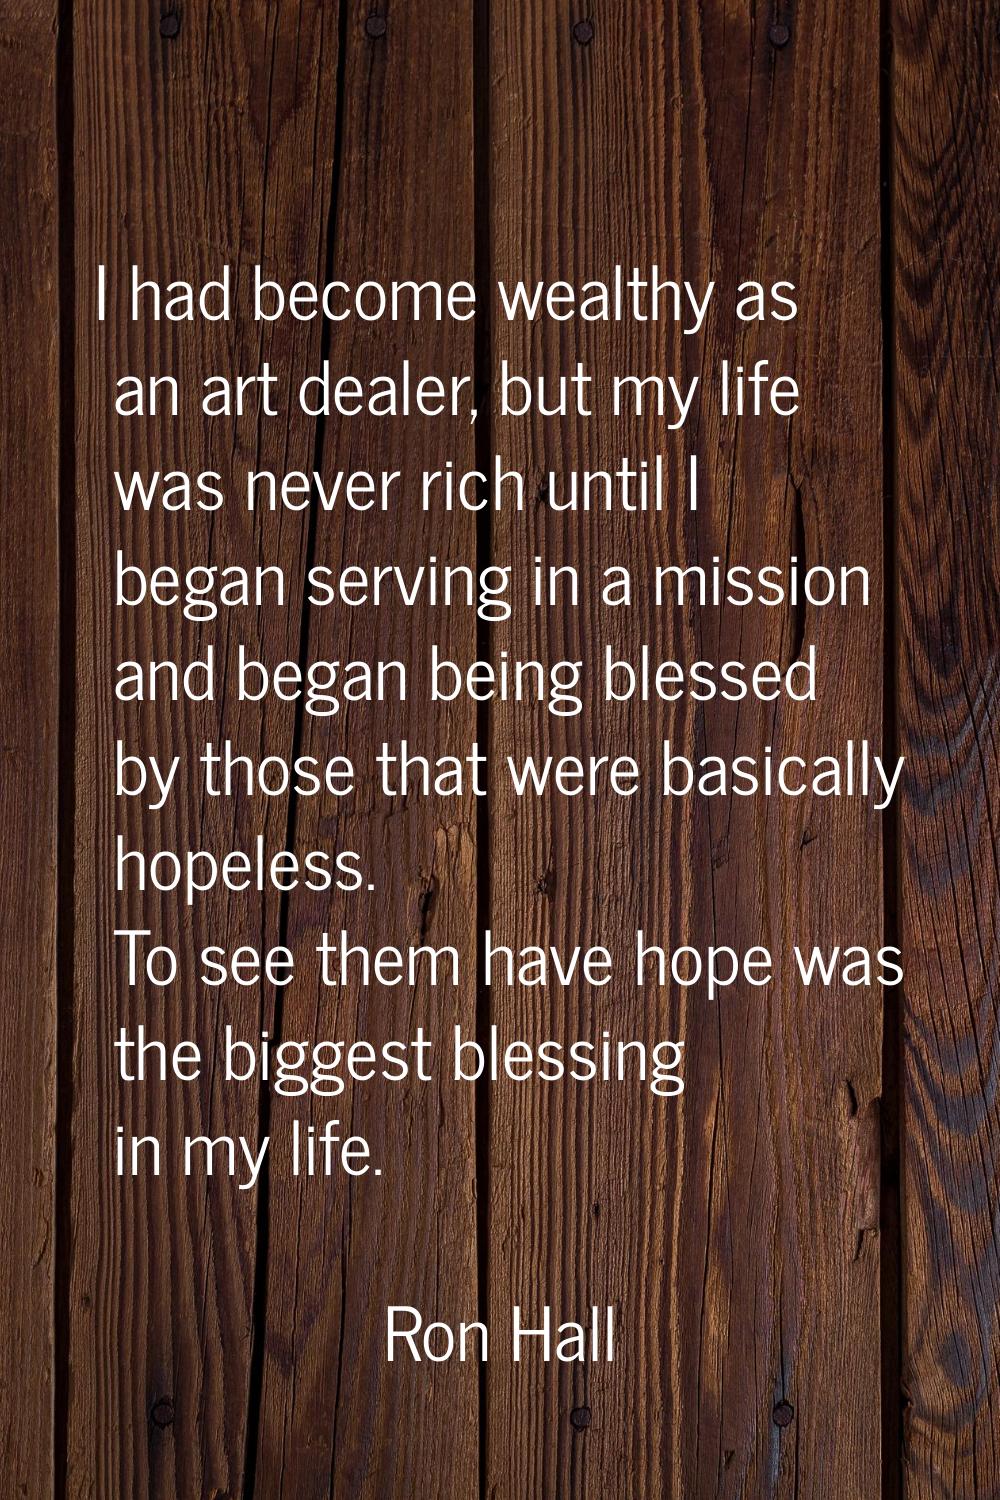 I had become wealthy as an art dealer, but my life was never rich until I began serving in a missio